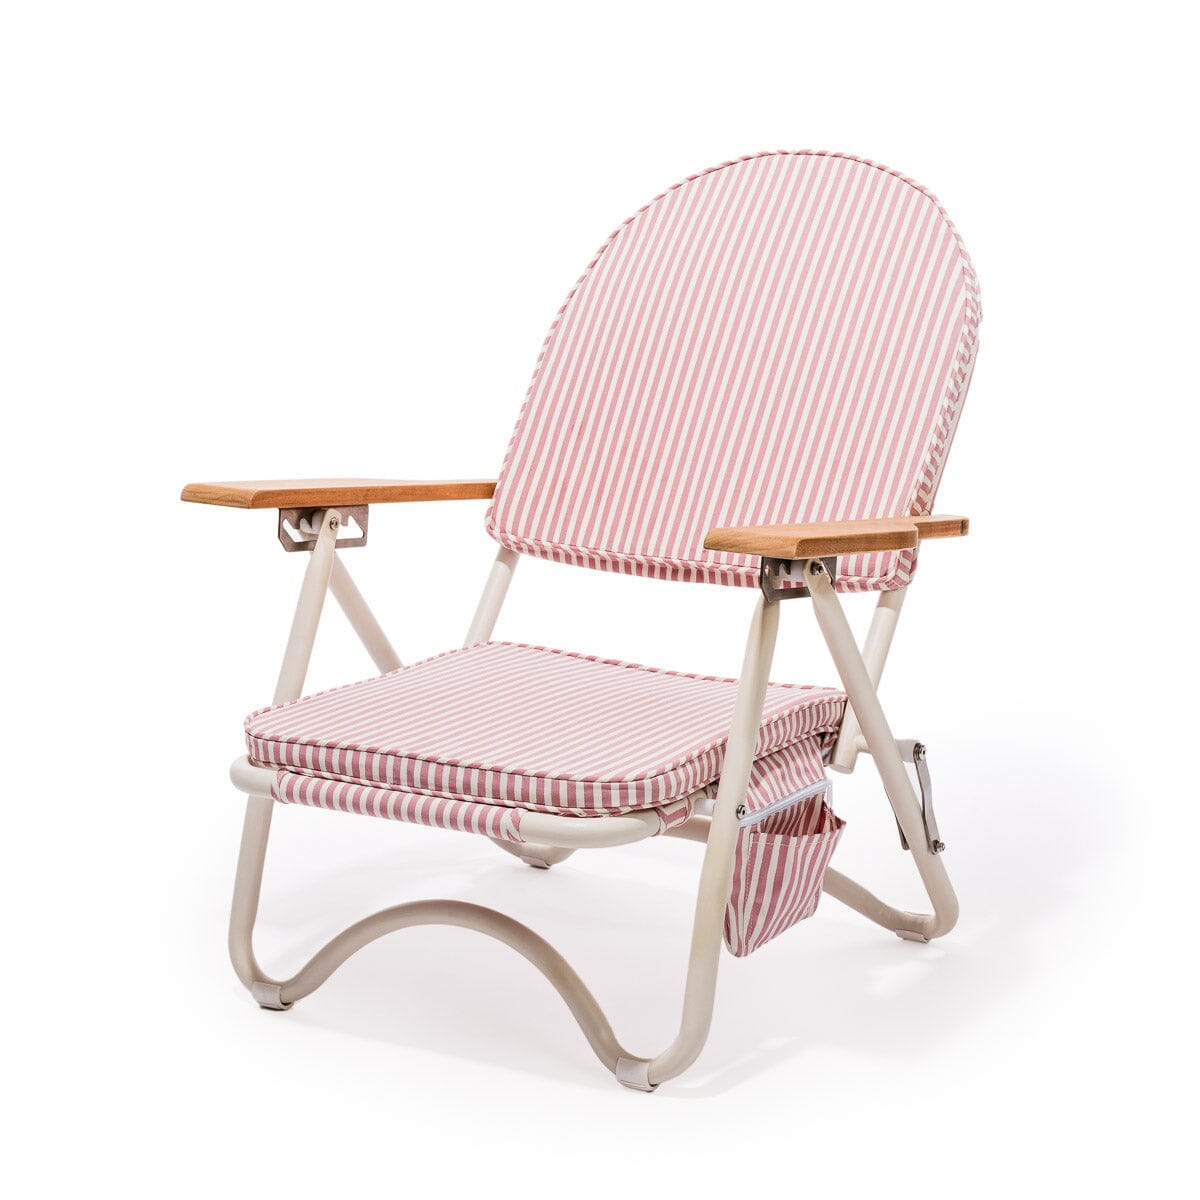 The Pam Chair - Laurens Pink Stripe Pam Chair Business & Pleasure Co 